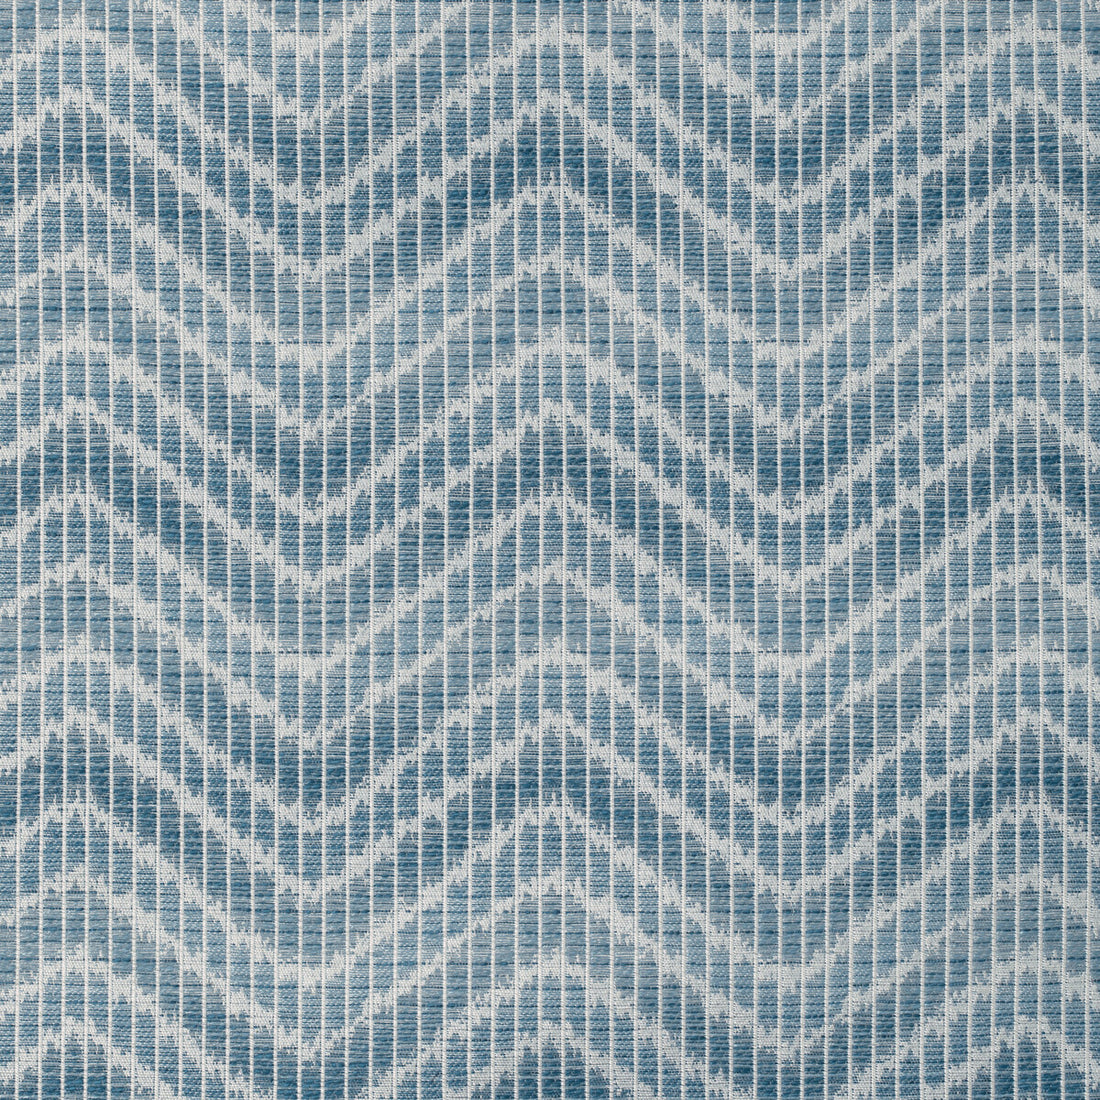 Chausey Woven fabric in blue color - pattern 8020106.5.0 - by Brunschwig &amp; Fils in the Granville Weaves collection